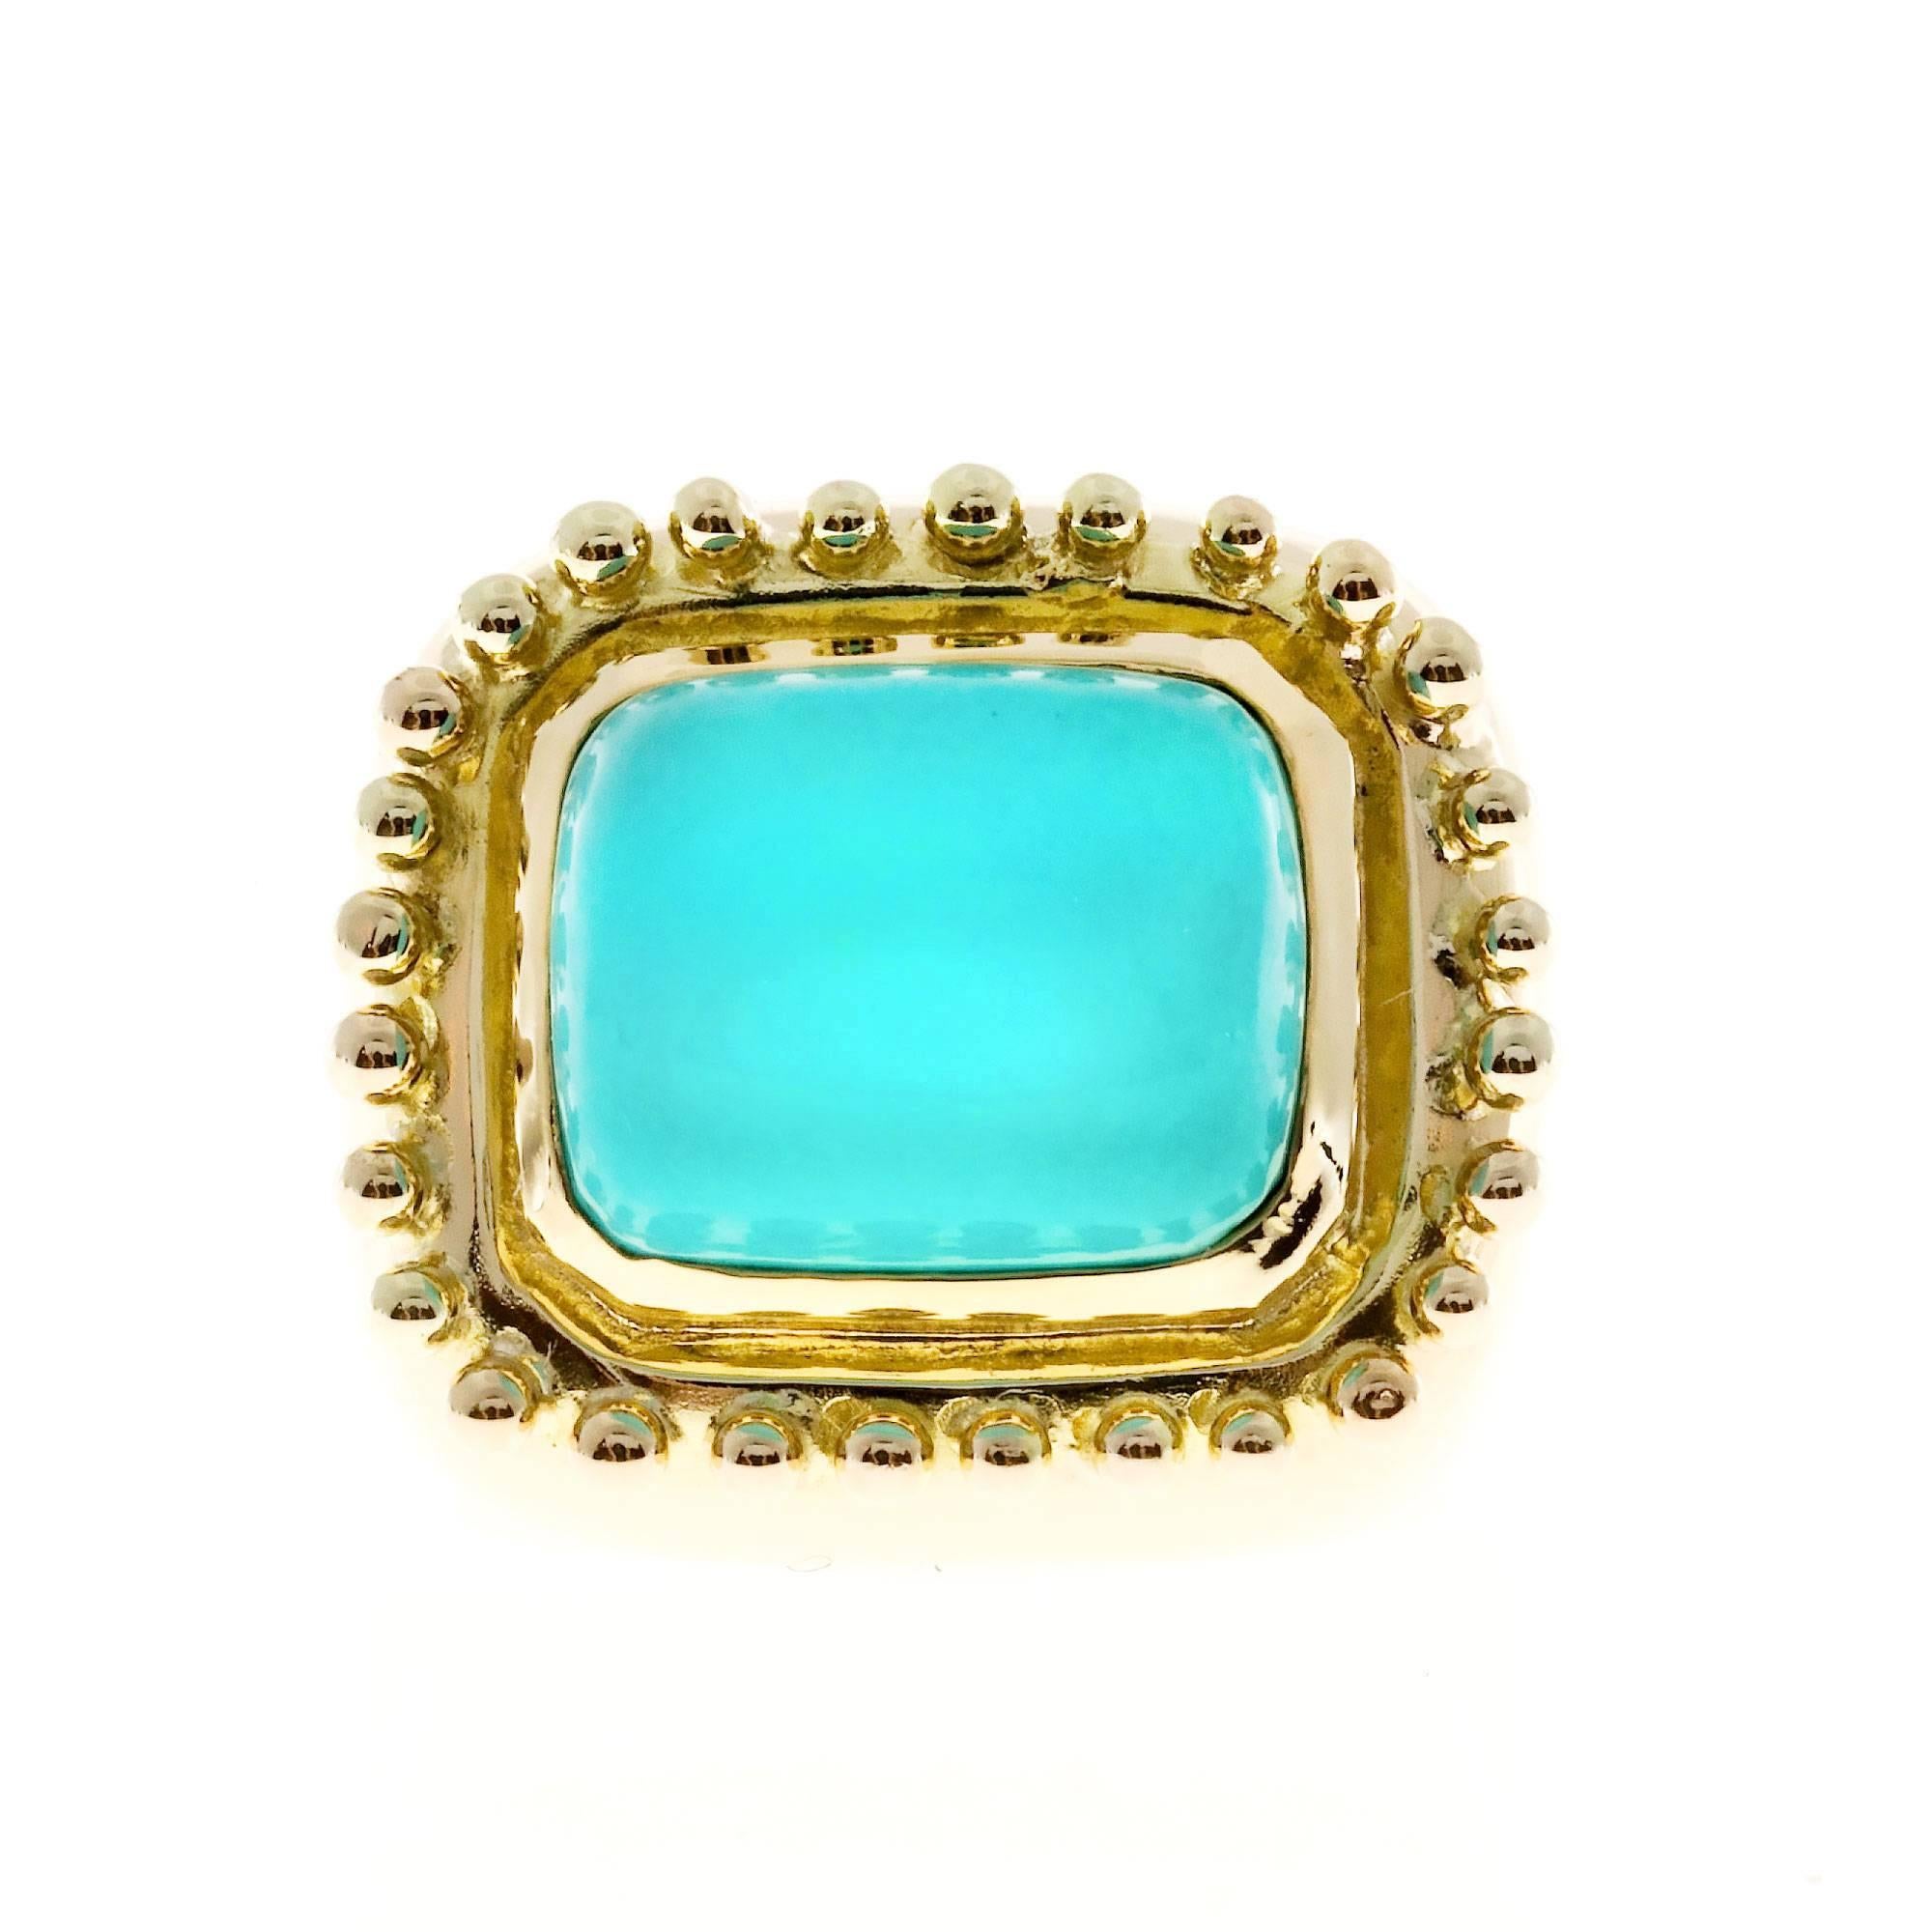 1960s heavy 14k yellow gold ring with a GIA certified natural untreated bright greenish blue Turquoise.

1 cabochon cushion greenish blue Turquoise, 10.98 x 13.62 x 16.15mm, GIA certificate #517254283
14k yellow gold
Tested: 14k
18.7